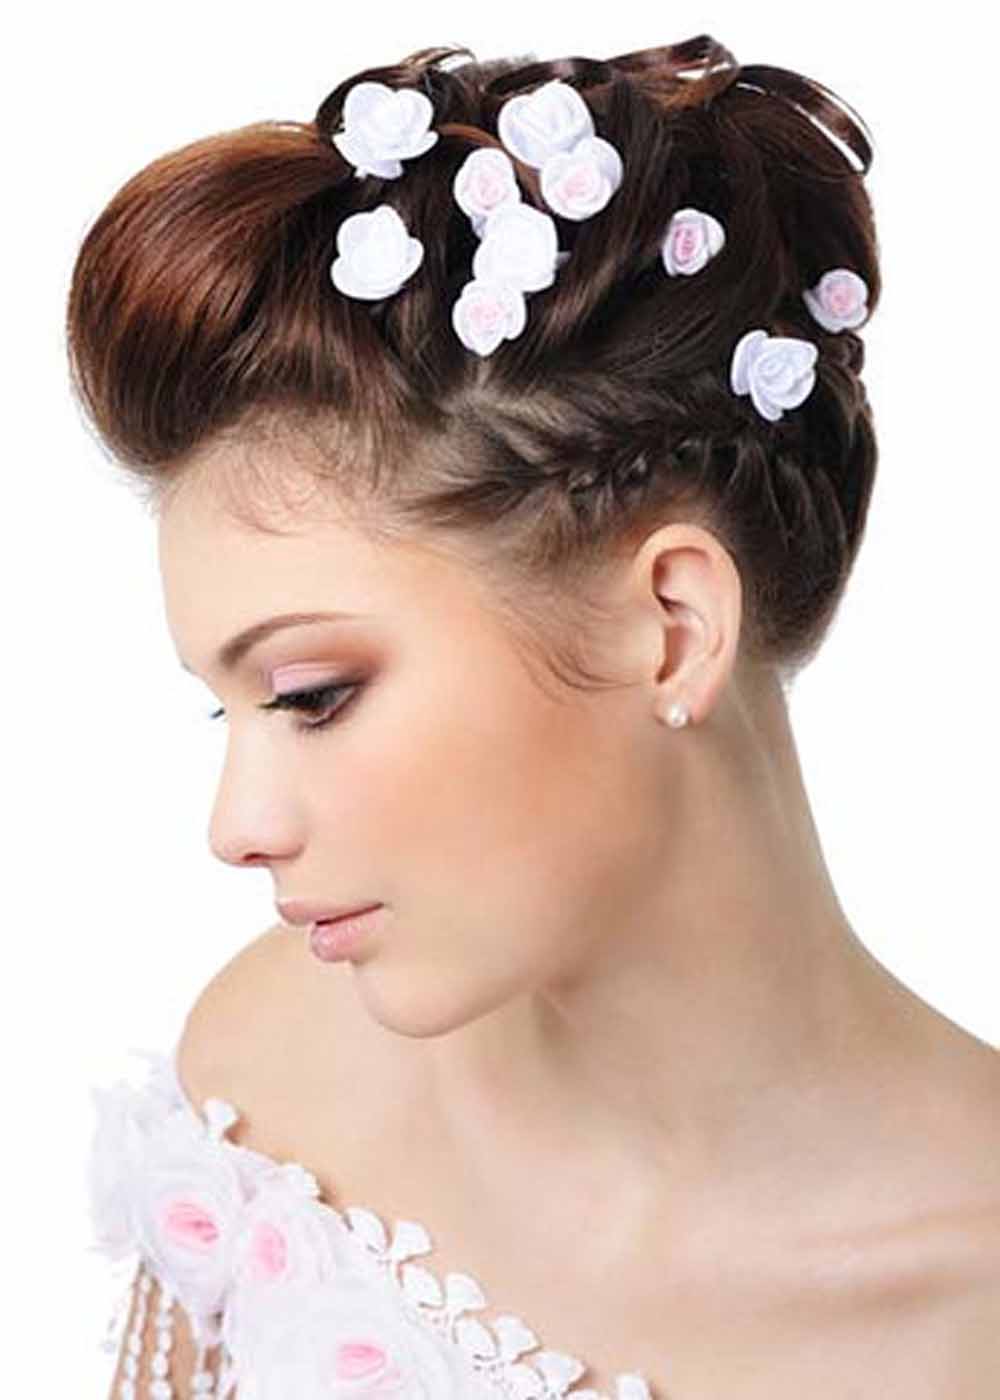 hairstyles popular 2012: Summer And Spring Wedding Hairstyle